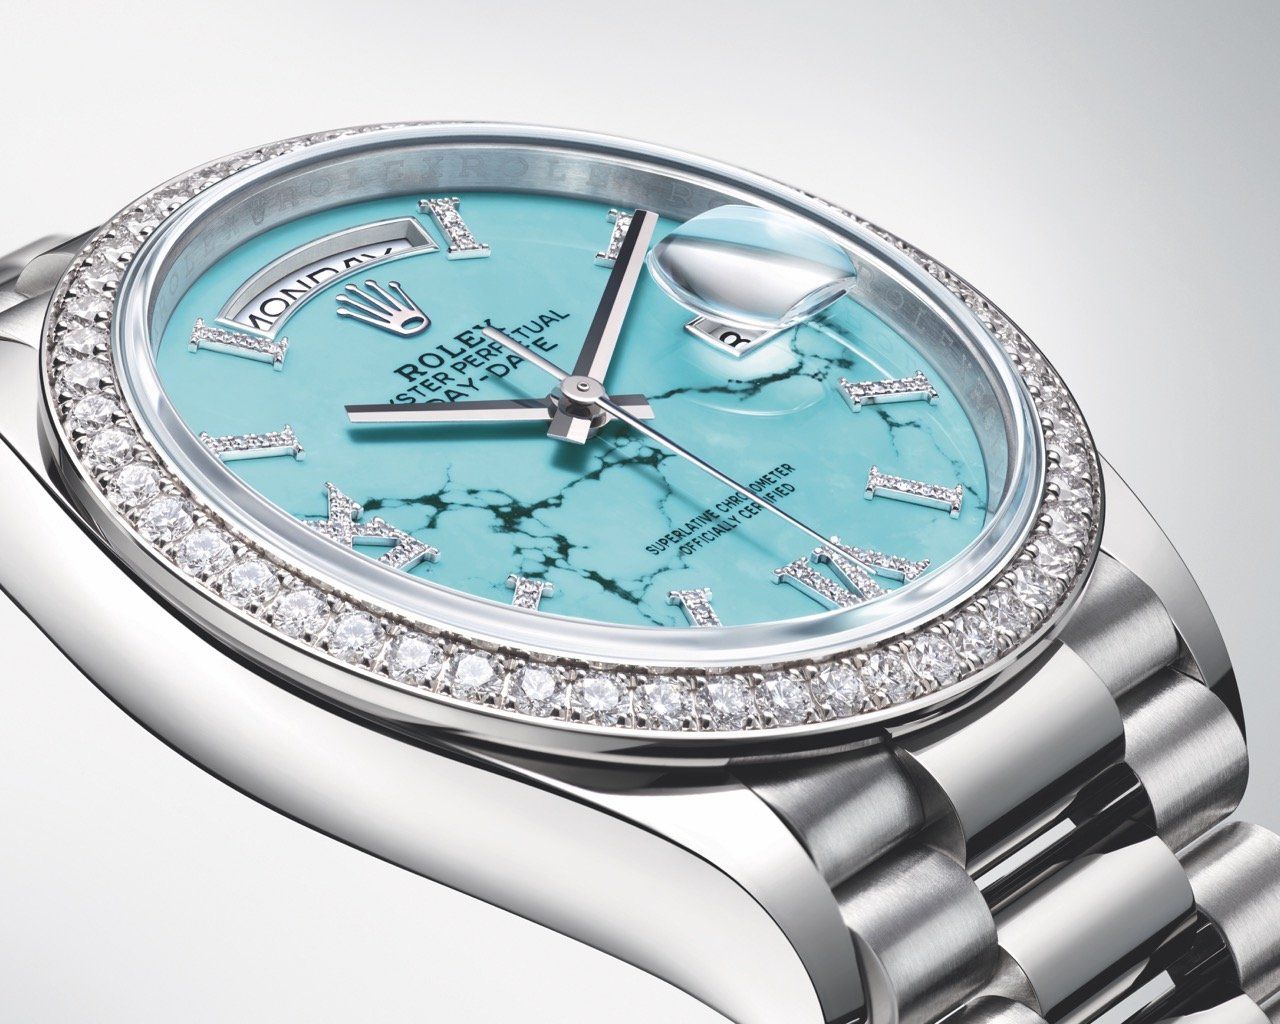 All the new Day-Date 36 models feature a Presidential bracelet with three-link construction